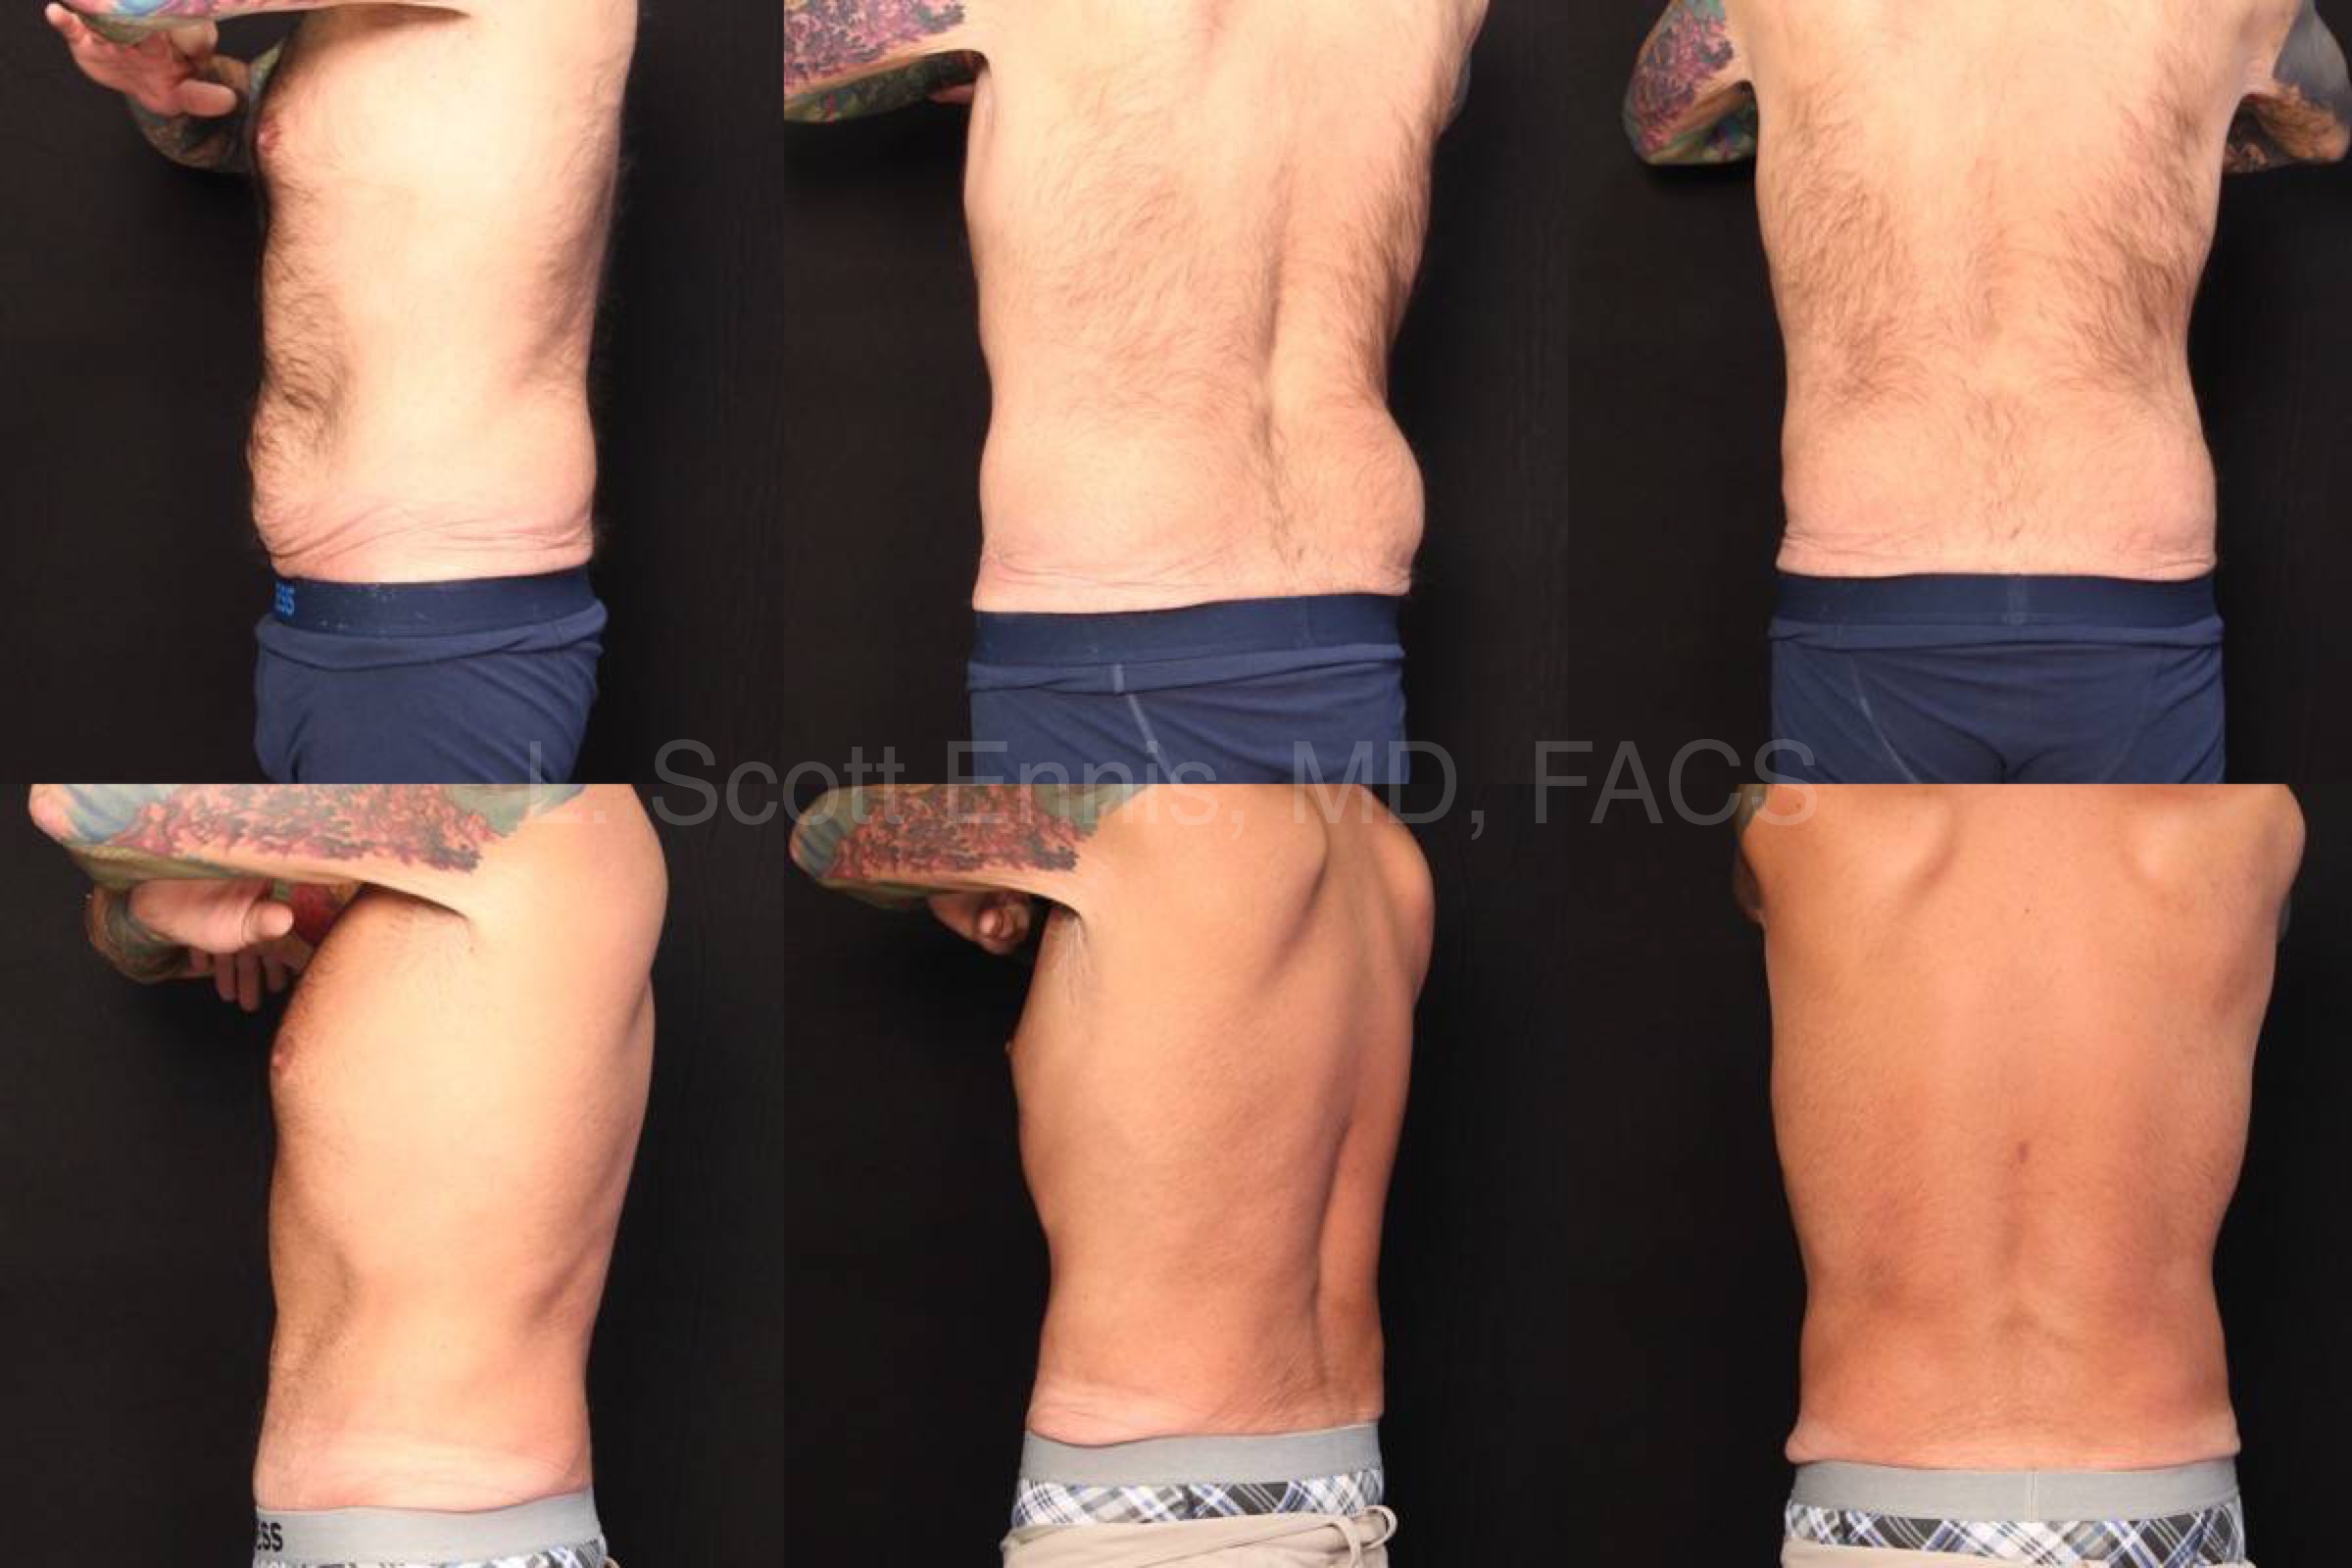 Male Abdominoplasty with Liposuction of Hips 44yo 5_11_ 174lb Before and After Ennis Plastic Surgery Palm Beach Boca Raton Destin Miami Fort Lauderdale